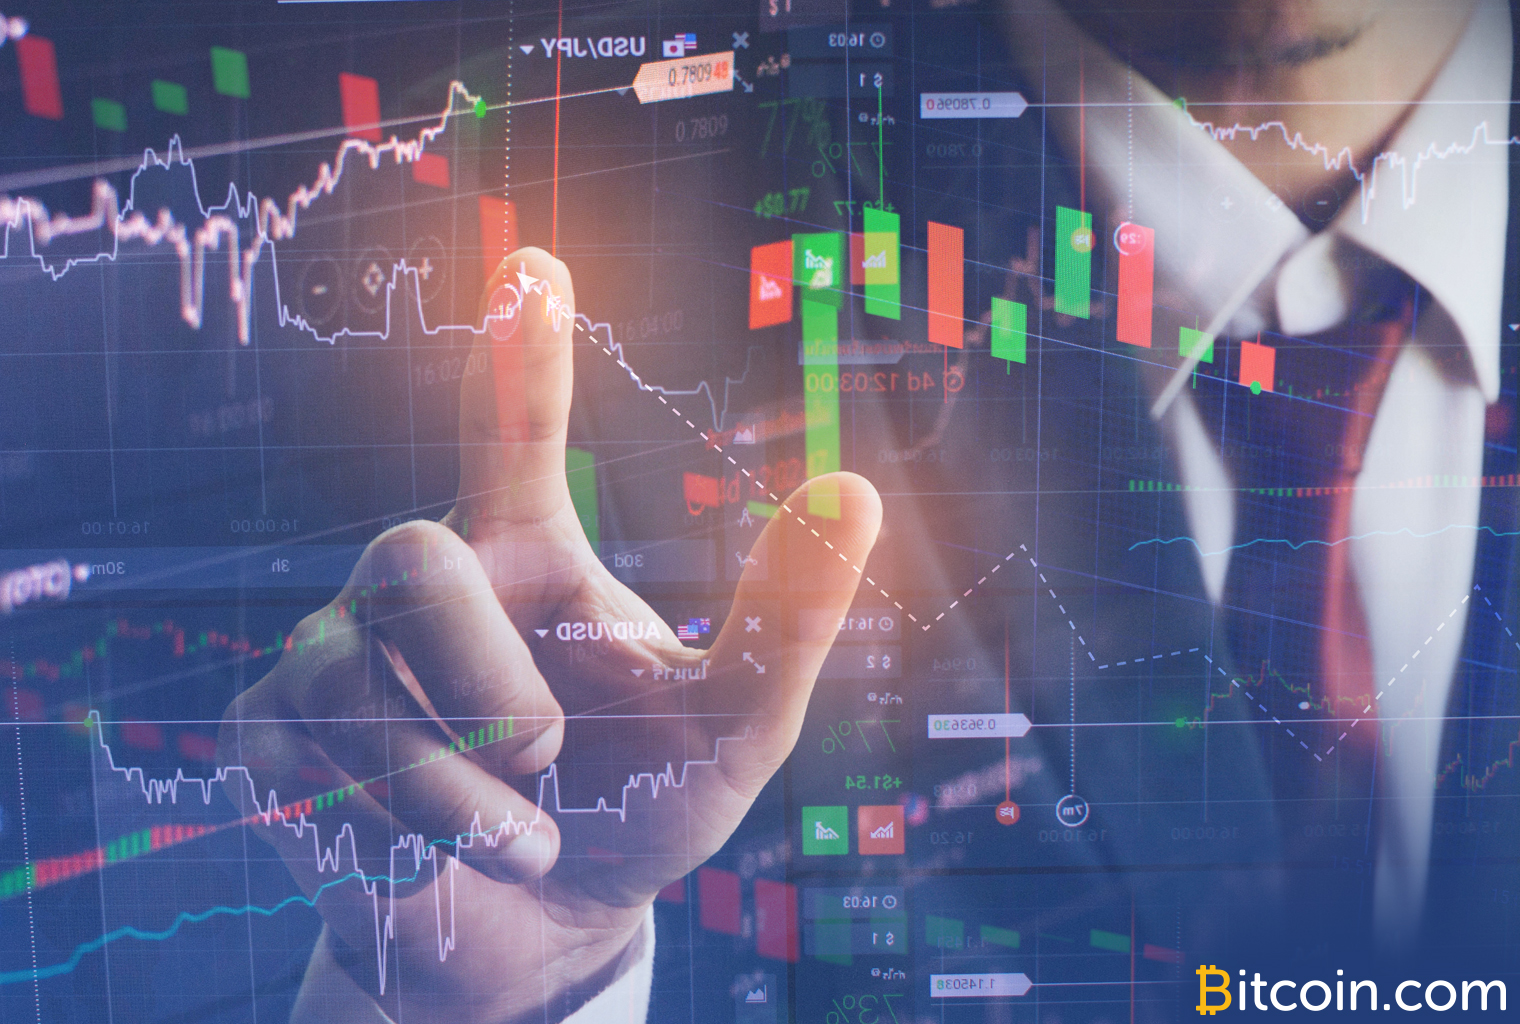 Markets Update: Crypto Prices Recover While Bitcoin Cash Lead the Charge Again